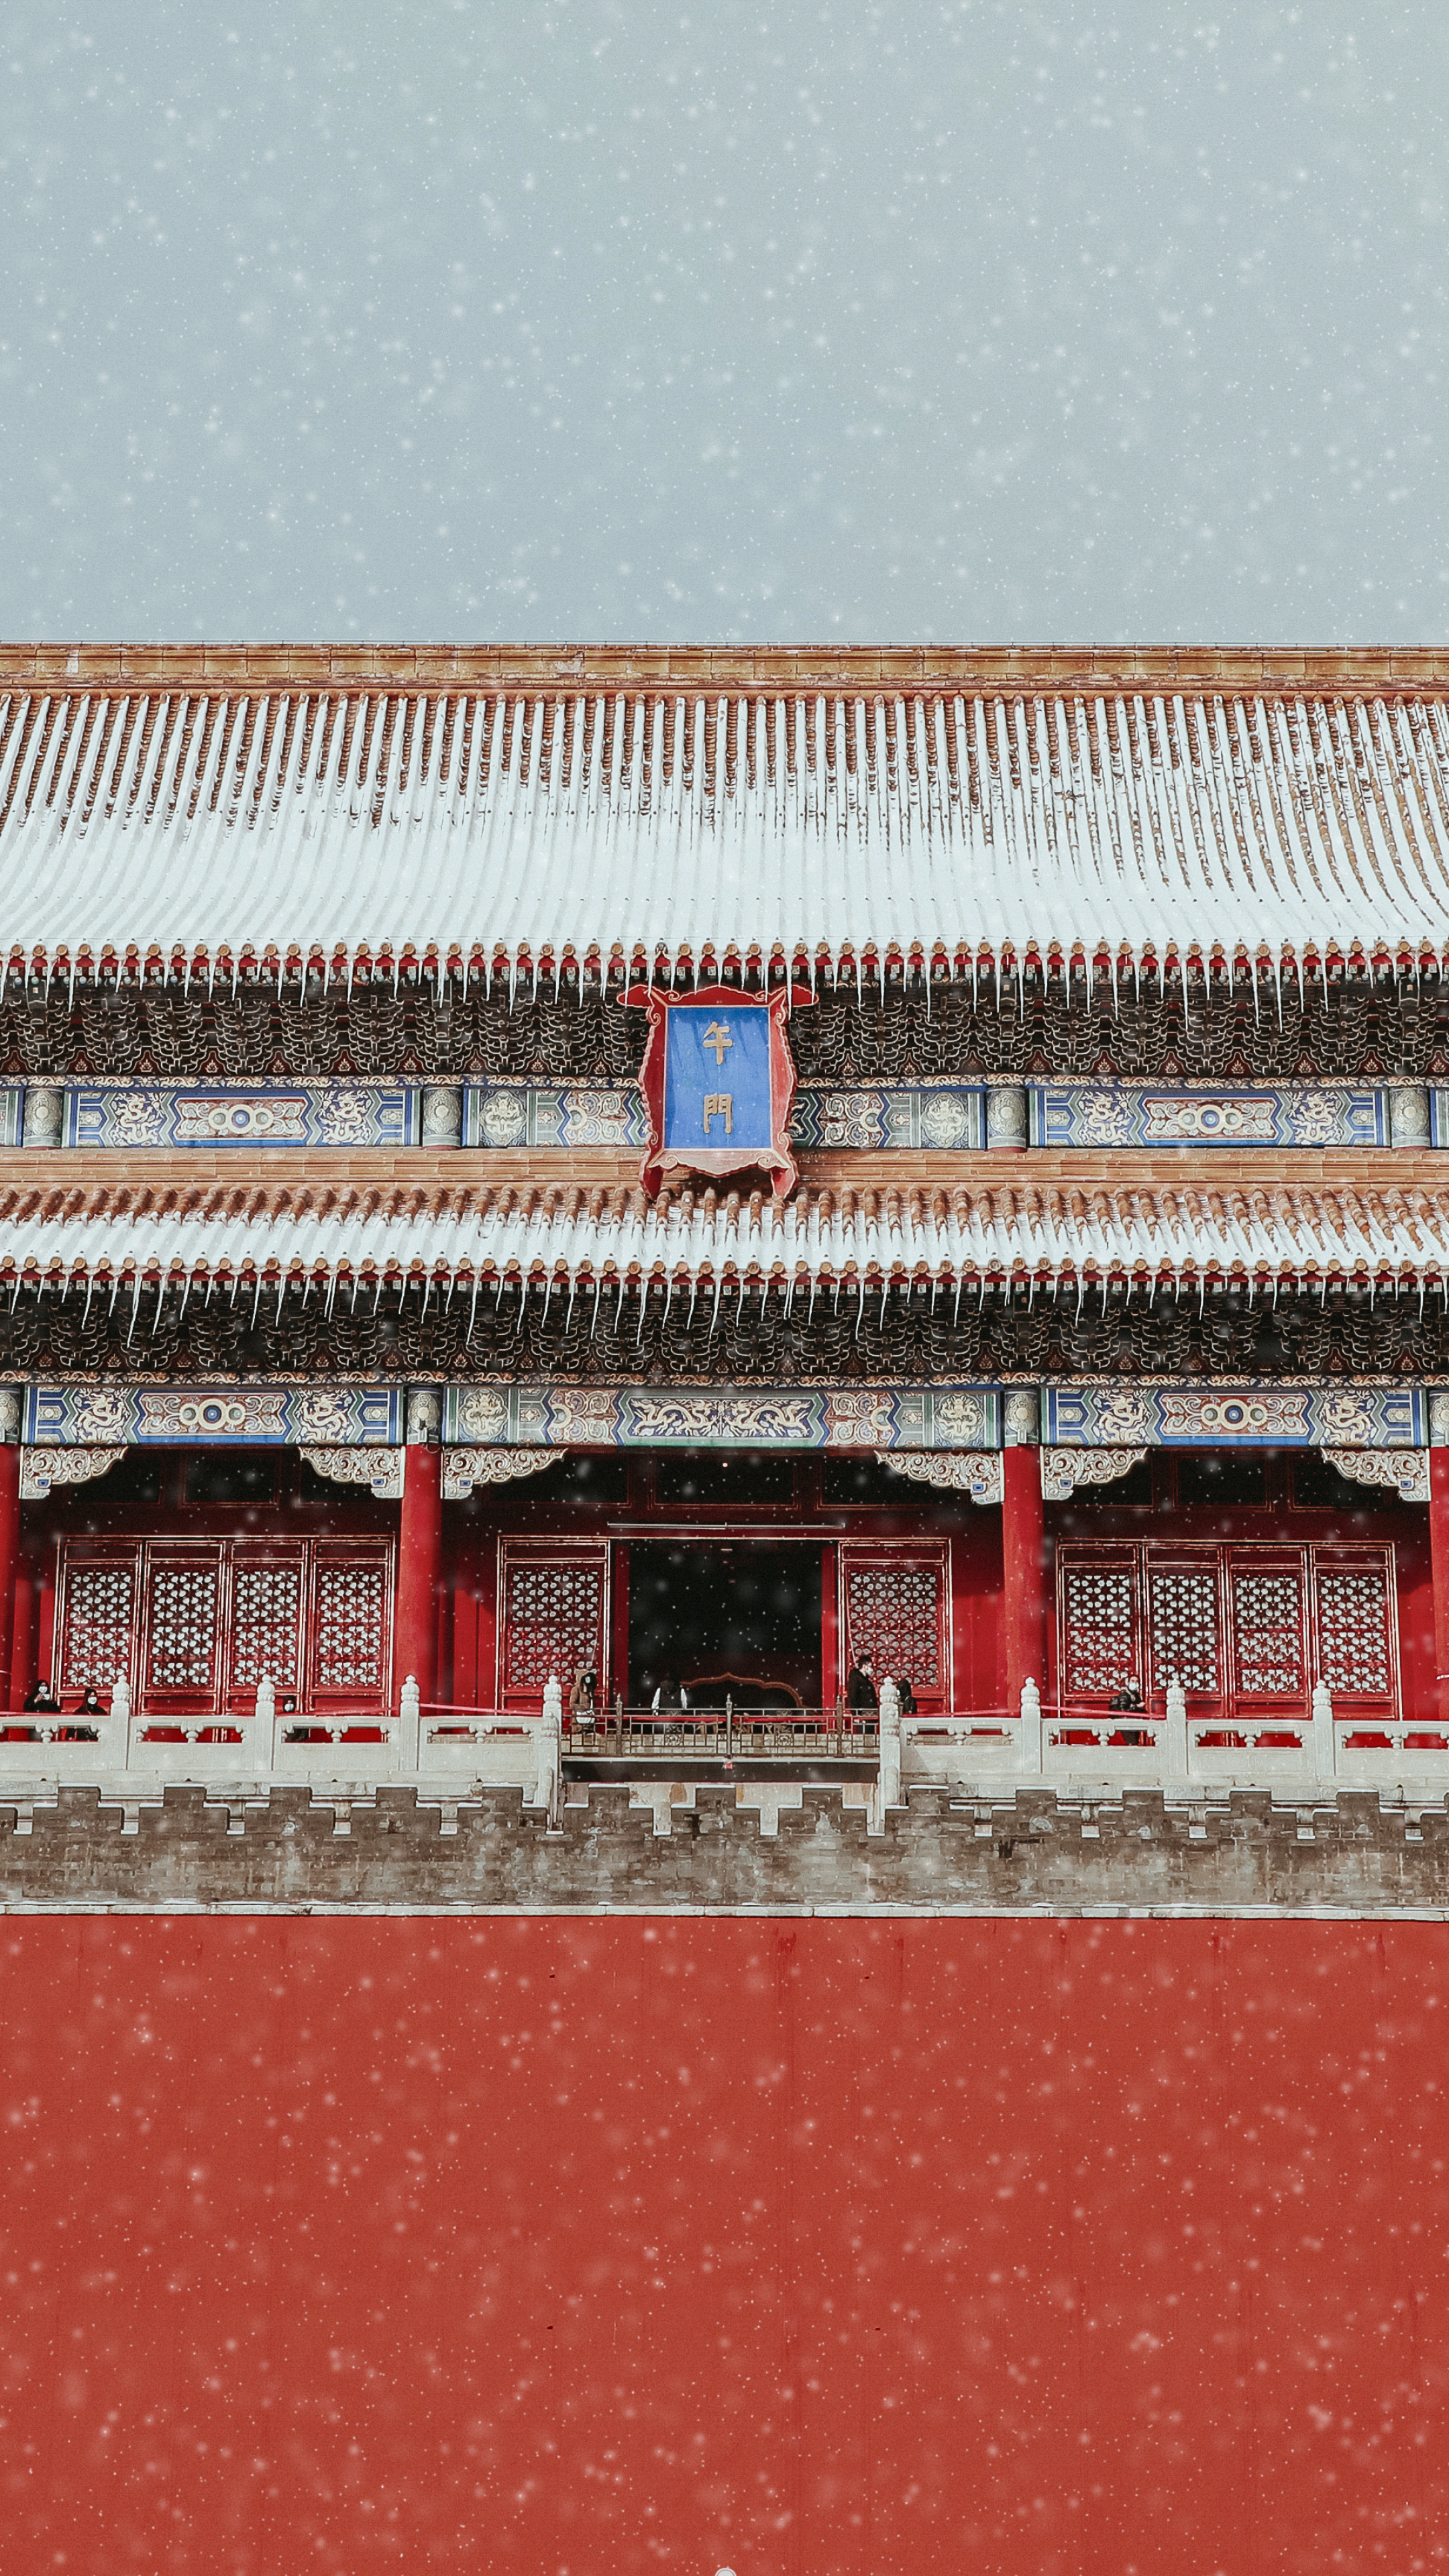 Forbidden City, Cultural heritage, Ancient palace, Chinese legacy, 2160x3840 4K Handy